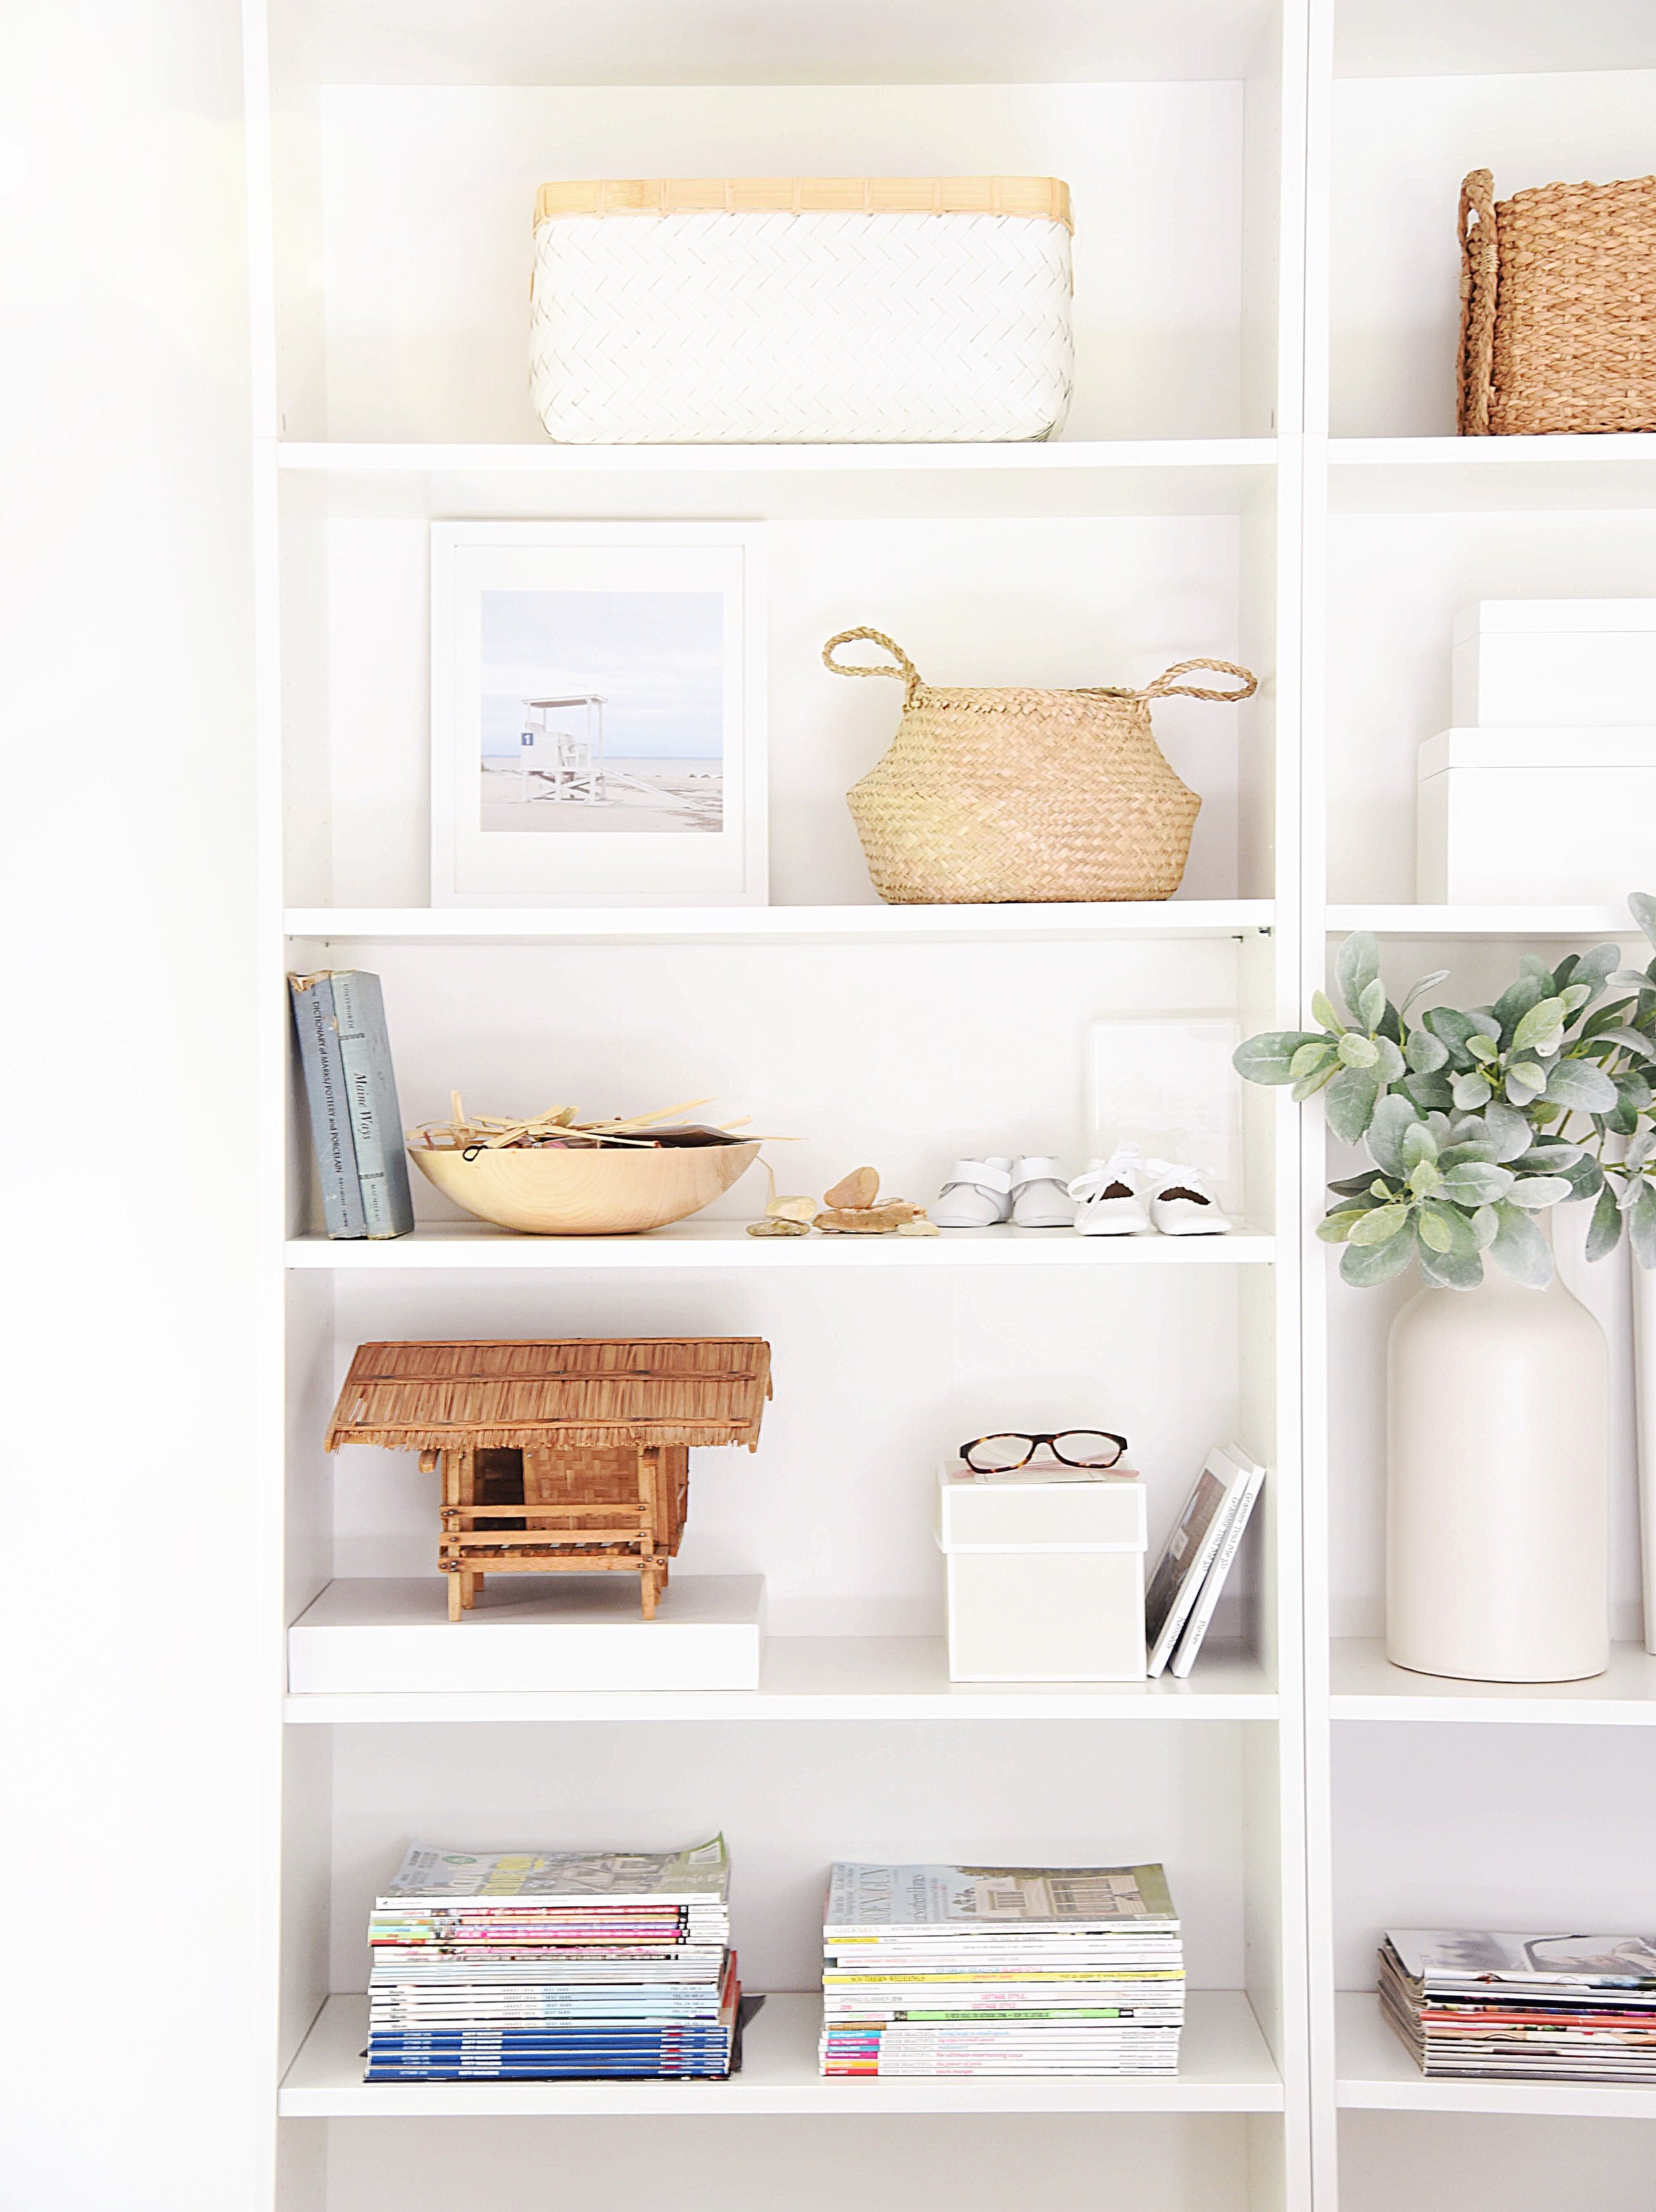 BOOKSHELF STYLING  11 TIPS & TRICKS FOR WHAT TO DISPLAY AND HOW